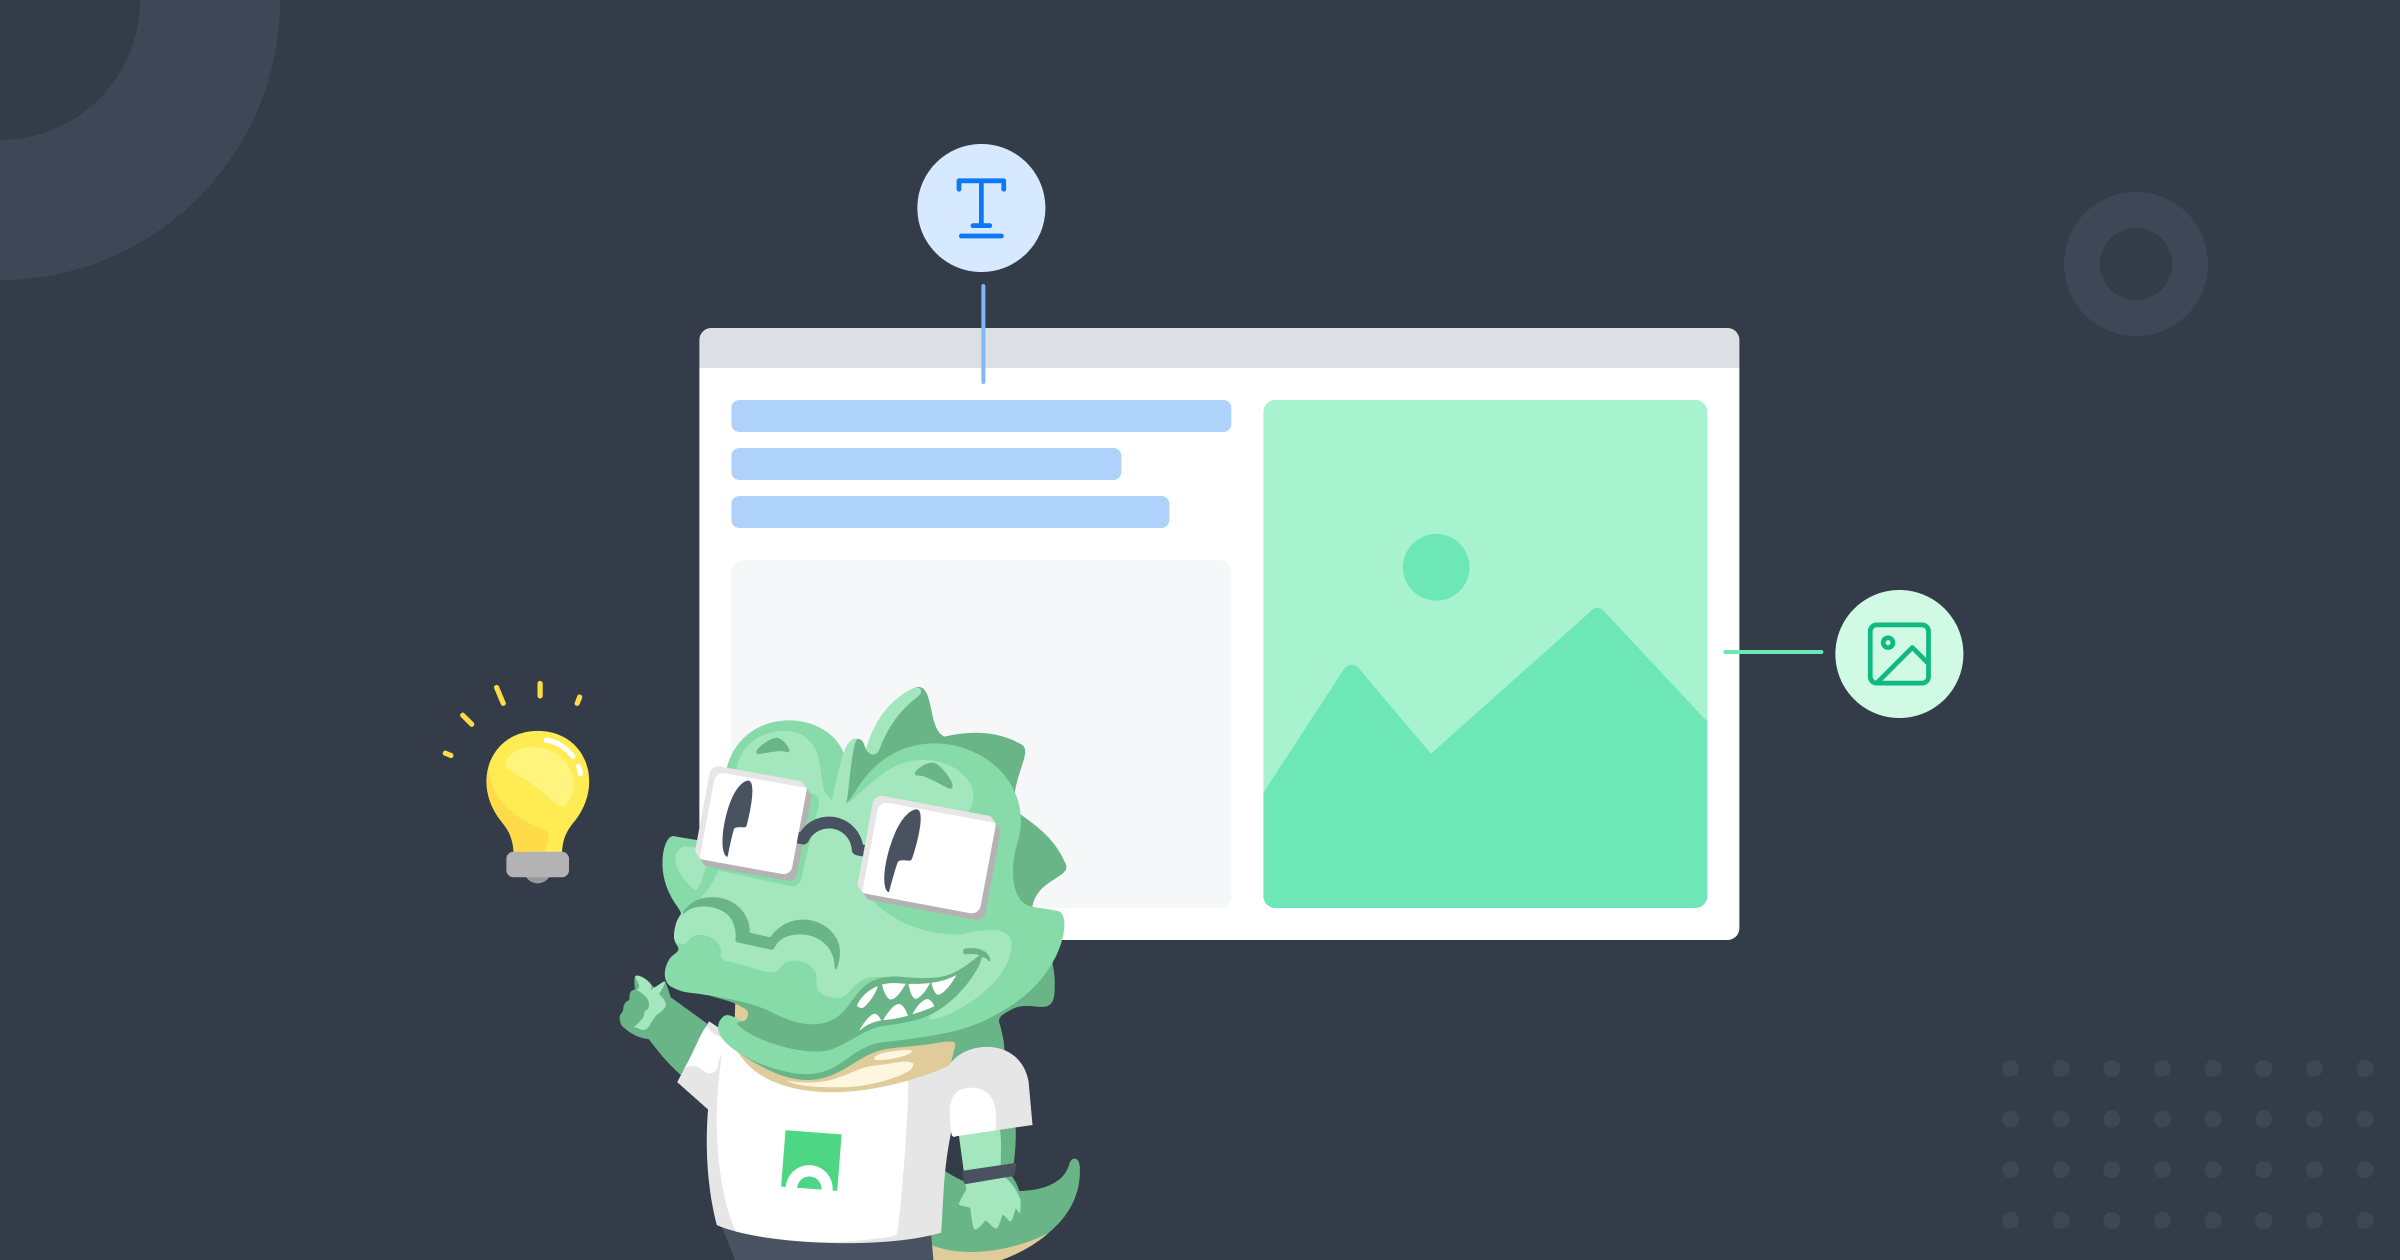 Croct's crocodile mascot having an ideia about how to personalize a website in front of wireframe with webpage elements.